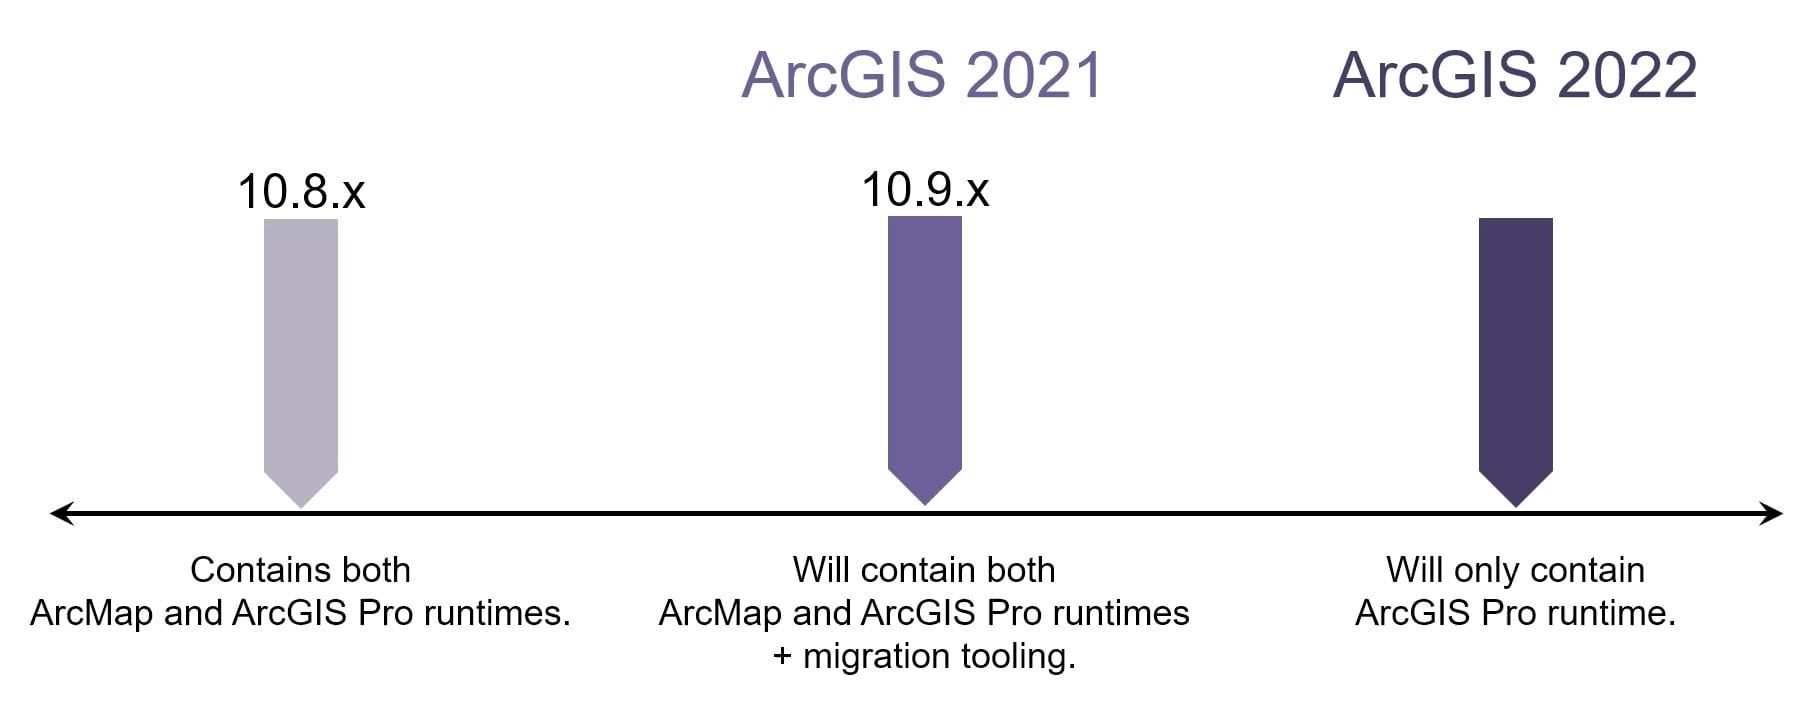 A timeline of the ArcGIS Enterprise releases in 2020, 2021, and 2022 and their respective runtimes that will be included.